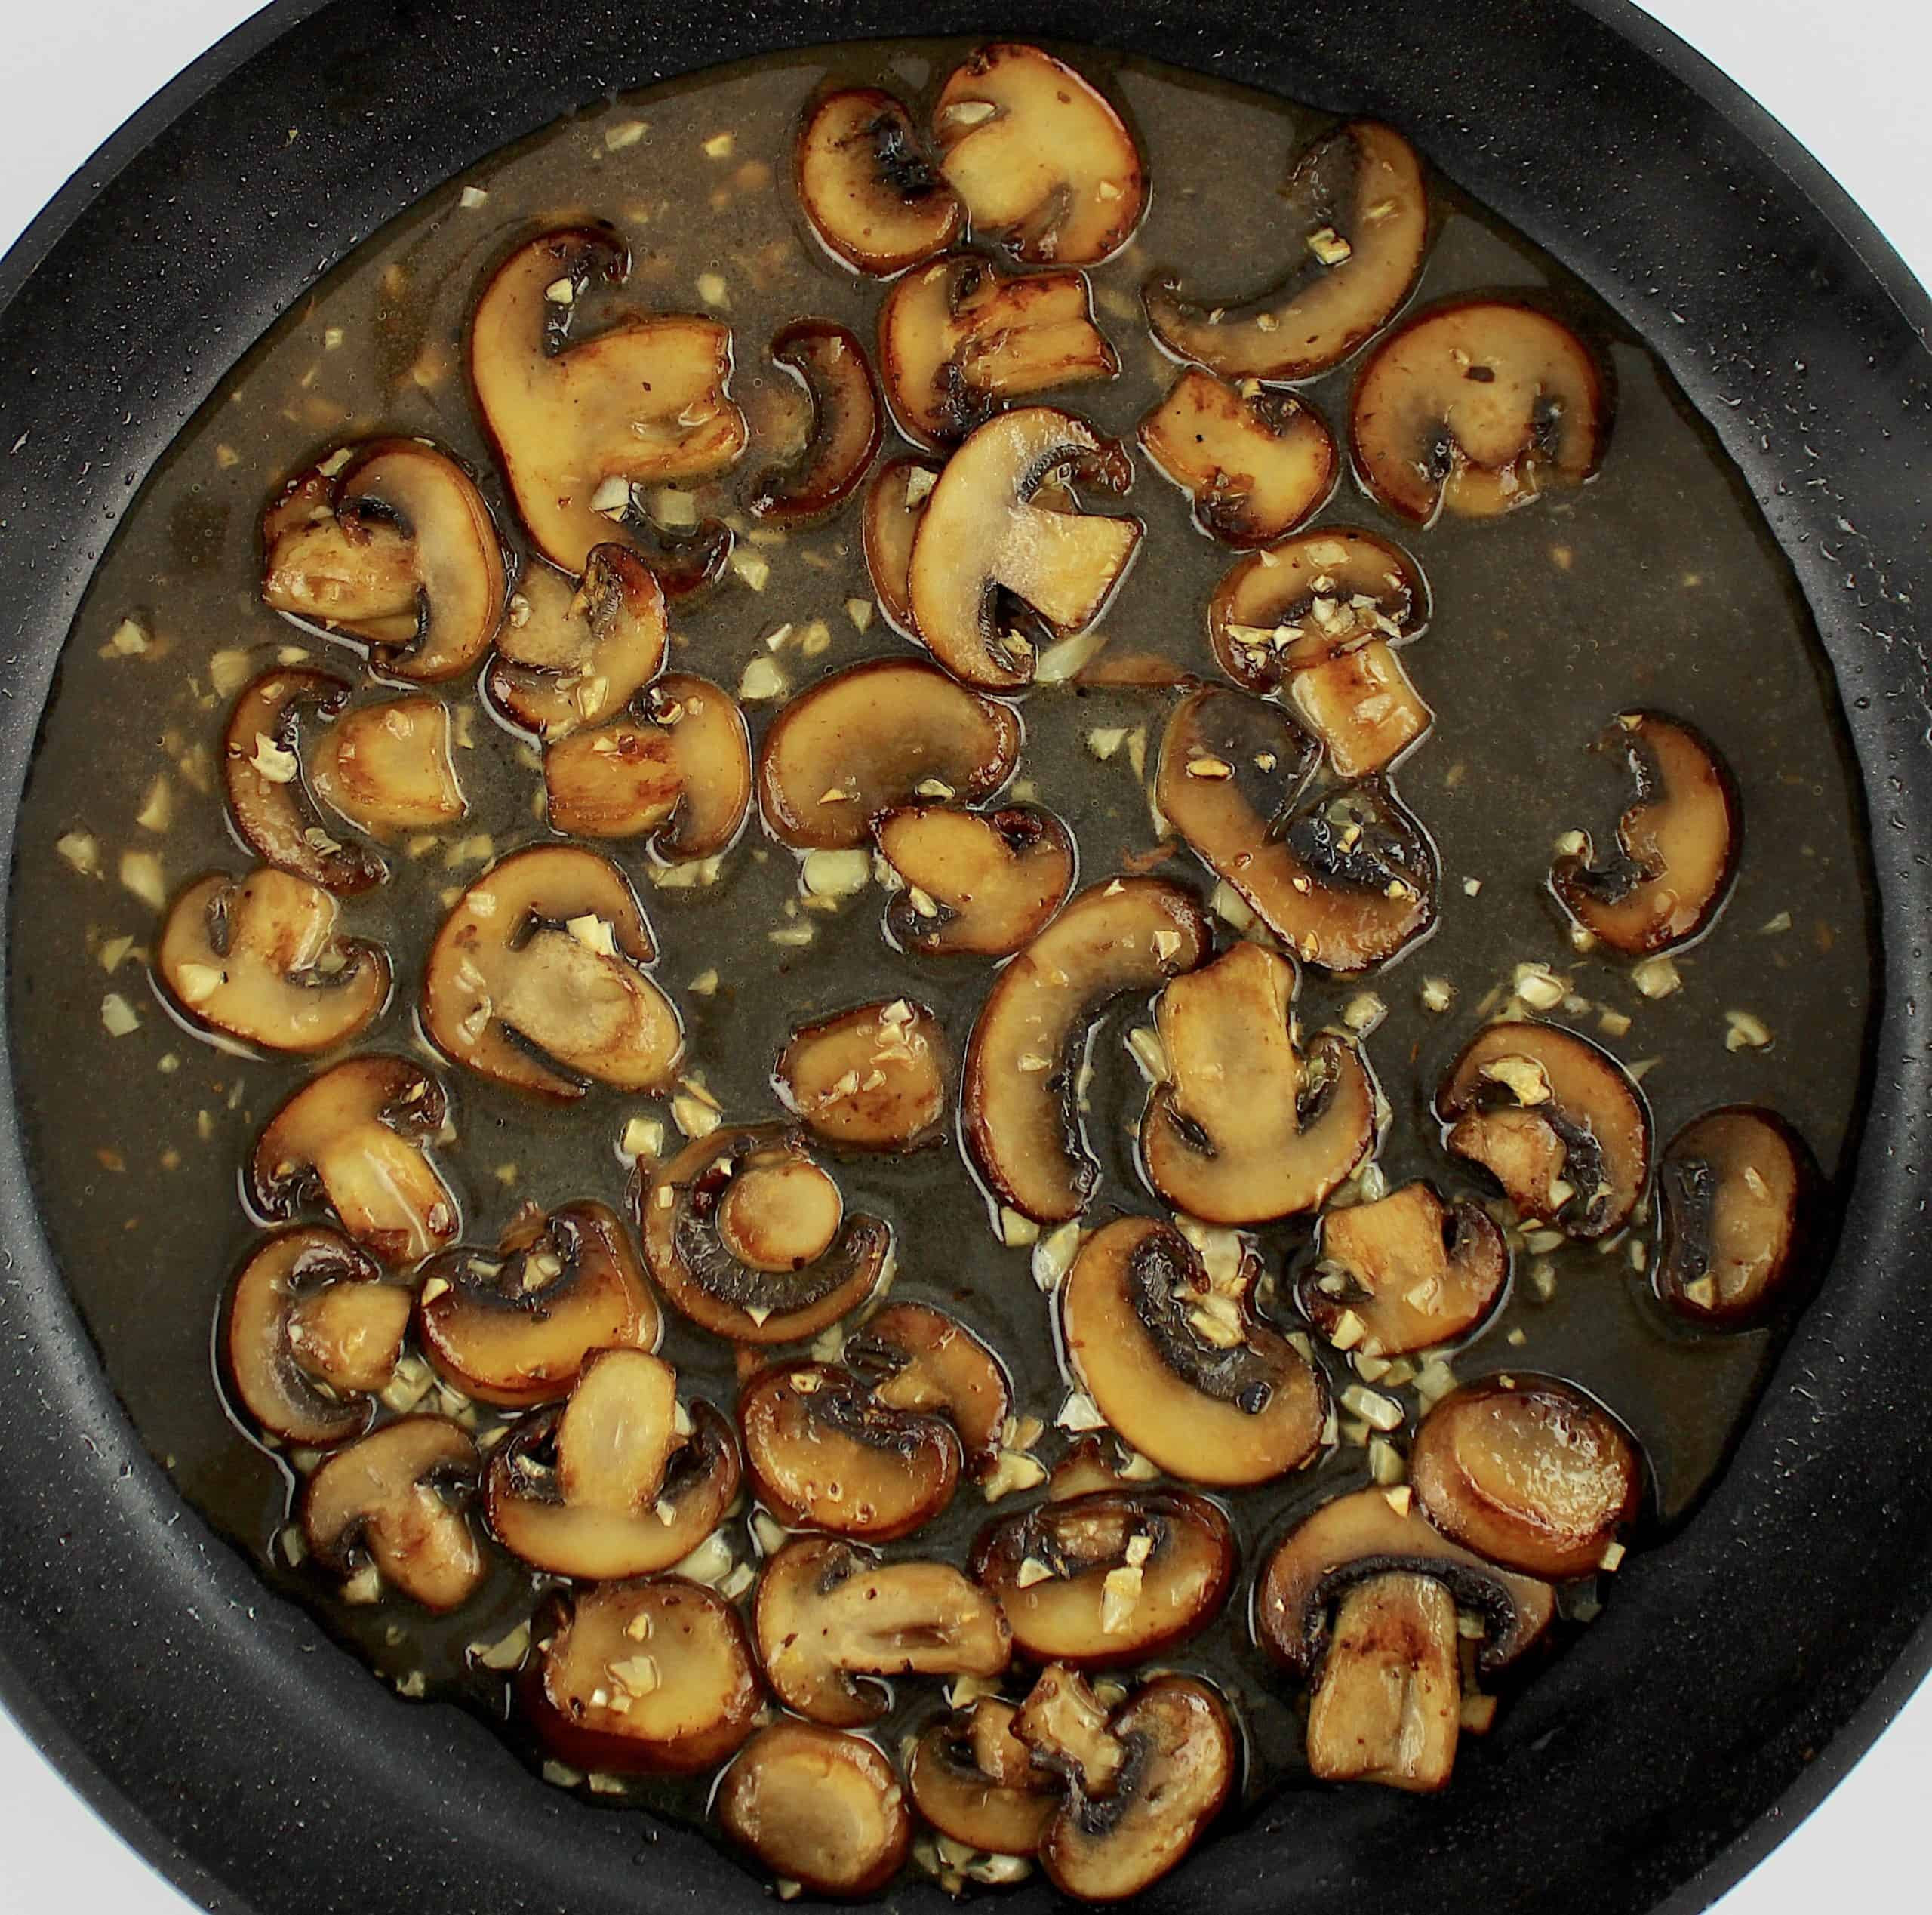 sauteed mushrooms and garlic with marsala wine in skillet